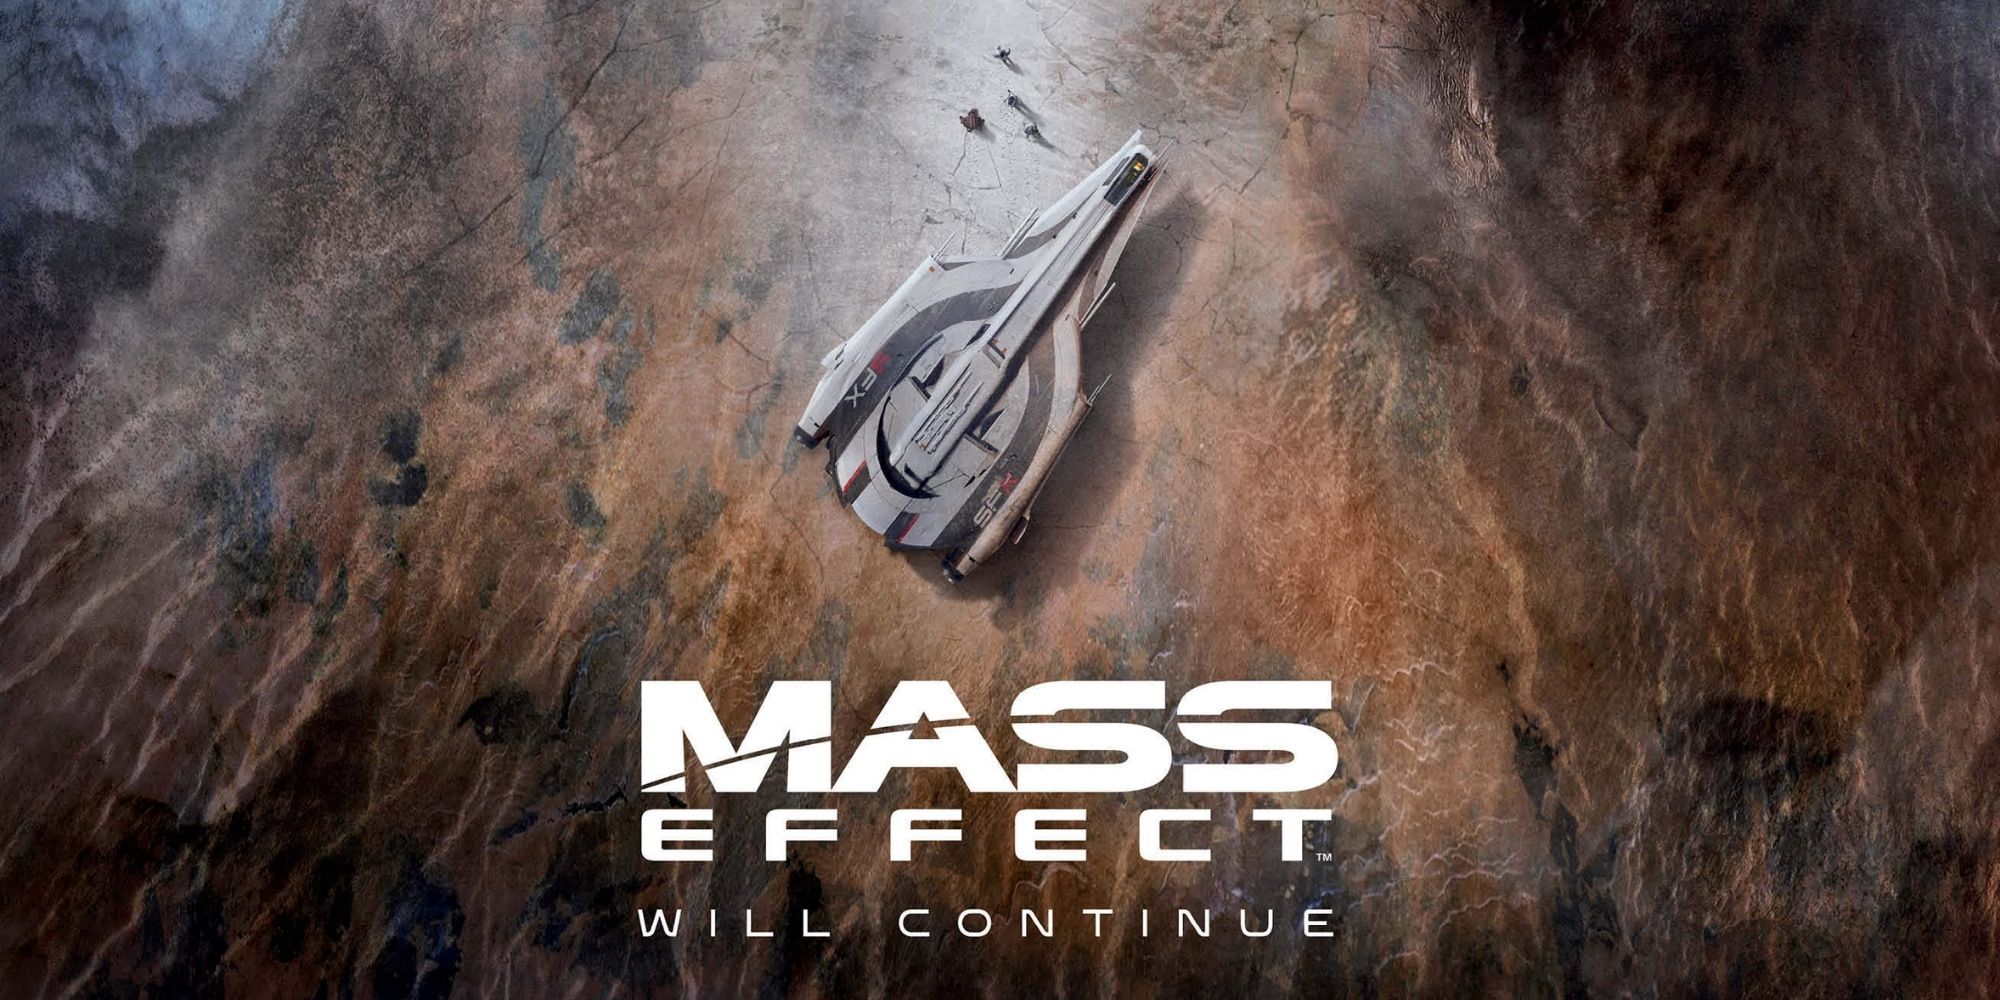 Mass Effect Poster Contains Five Surprises Fans Think Grunt Is One Of Them